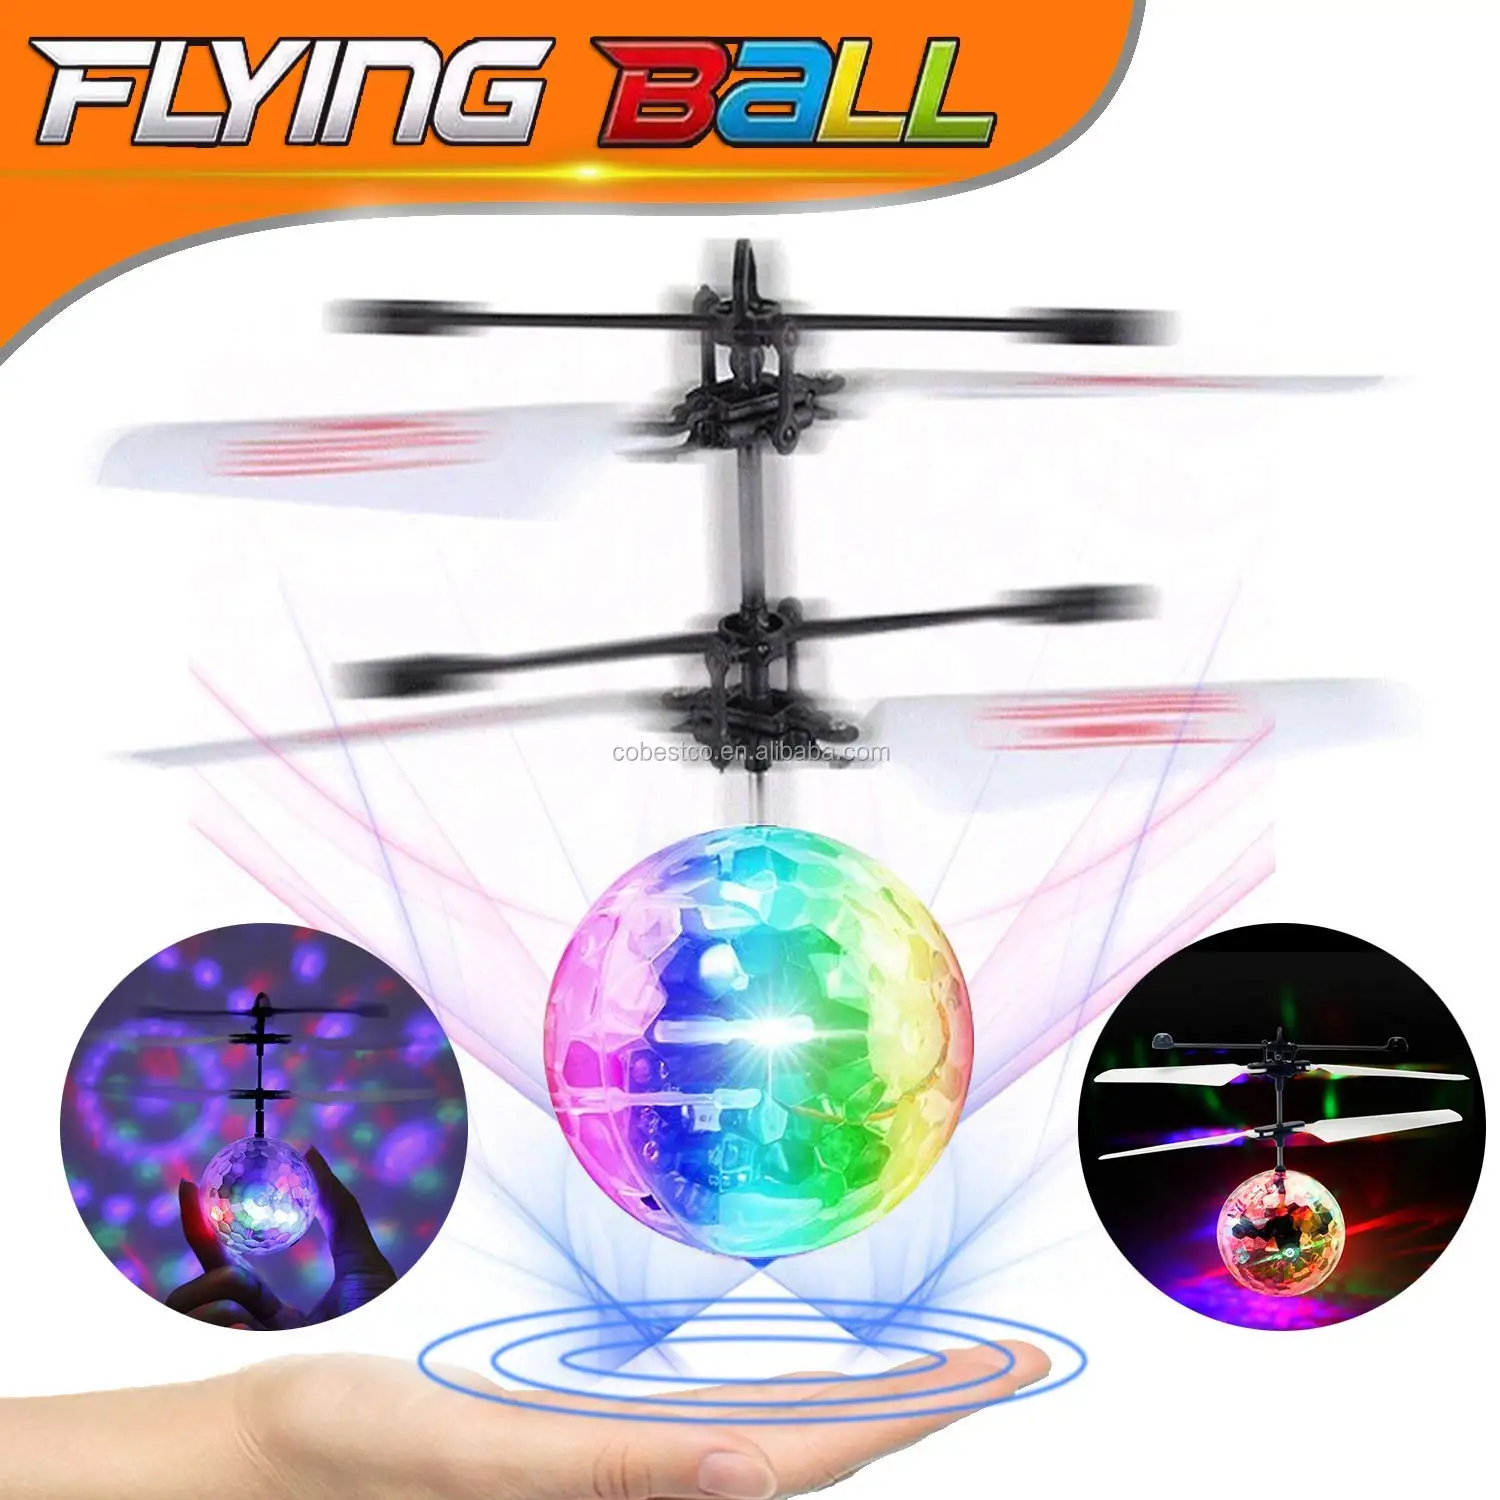 YINYU TOYS Quality RC Flying Ball with Color Changing LED Lights Teen Green RC Infrared Induction Helicopter Ball Built-in Shinning Color Changing LED Lights for Kids 